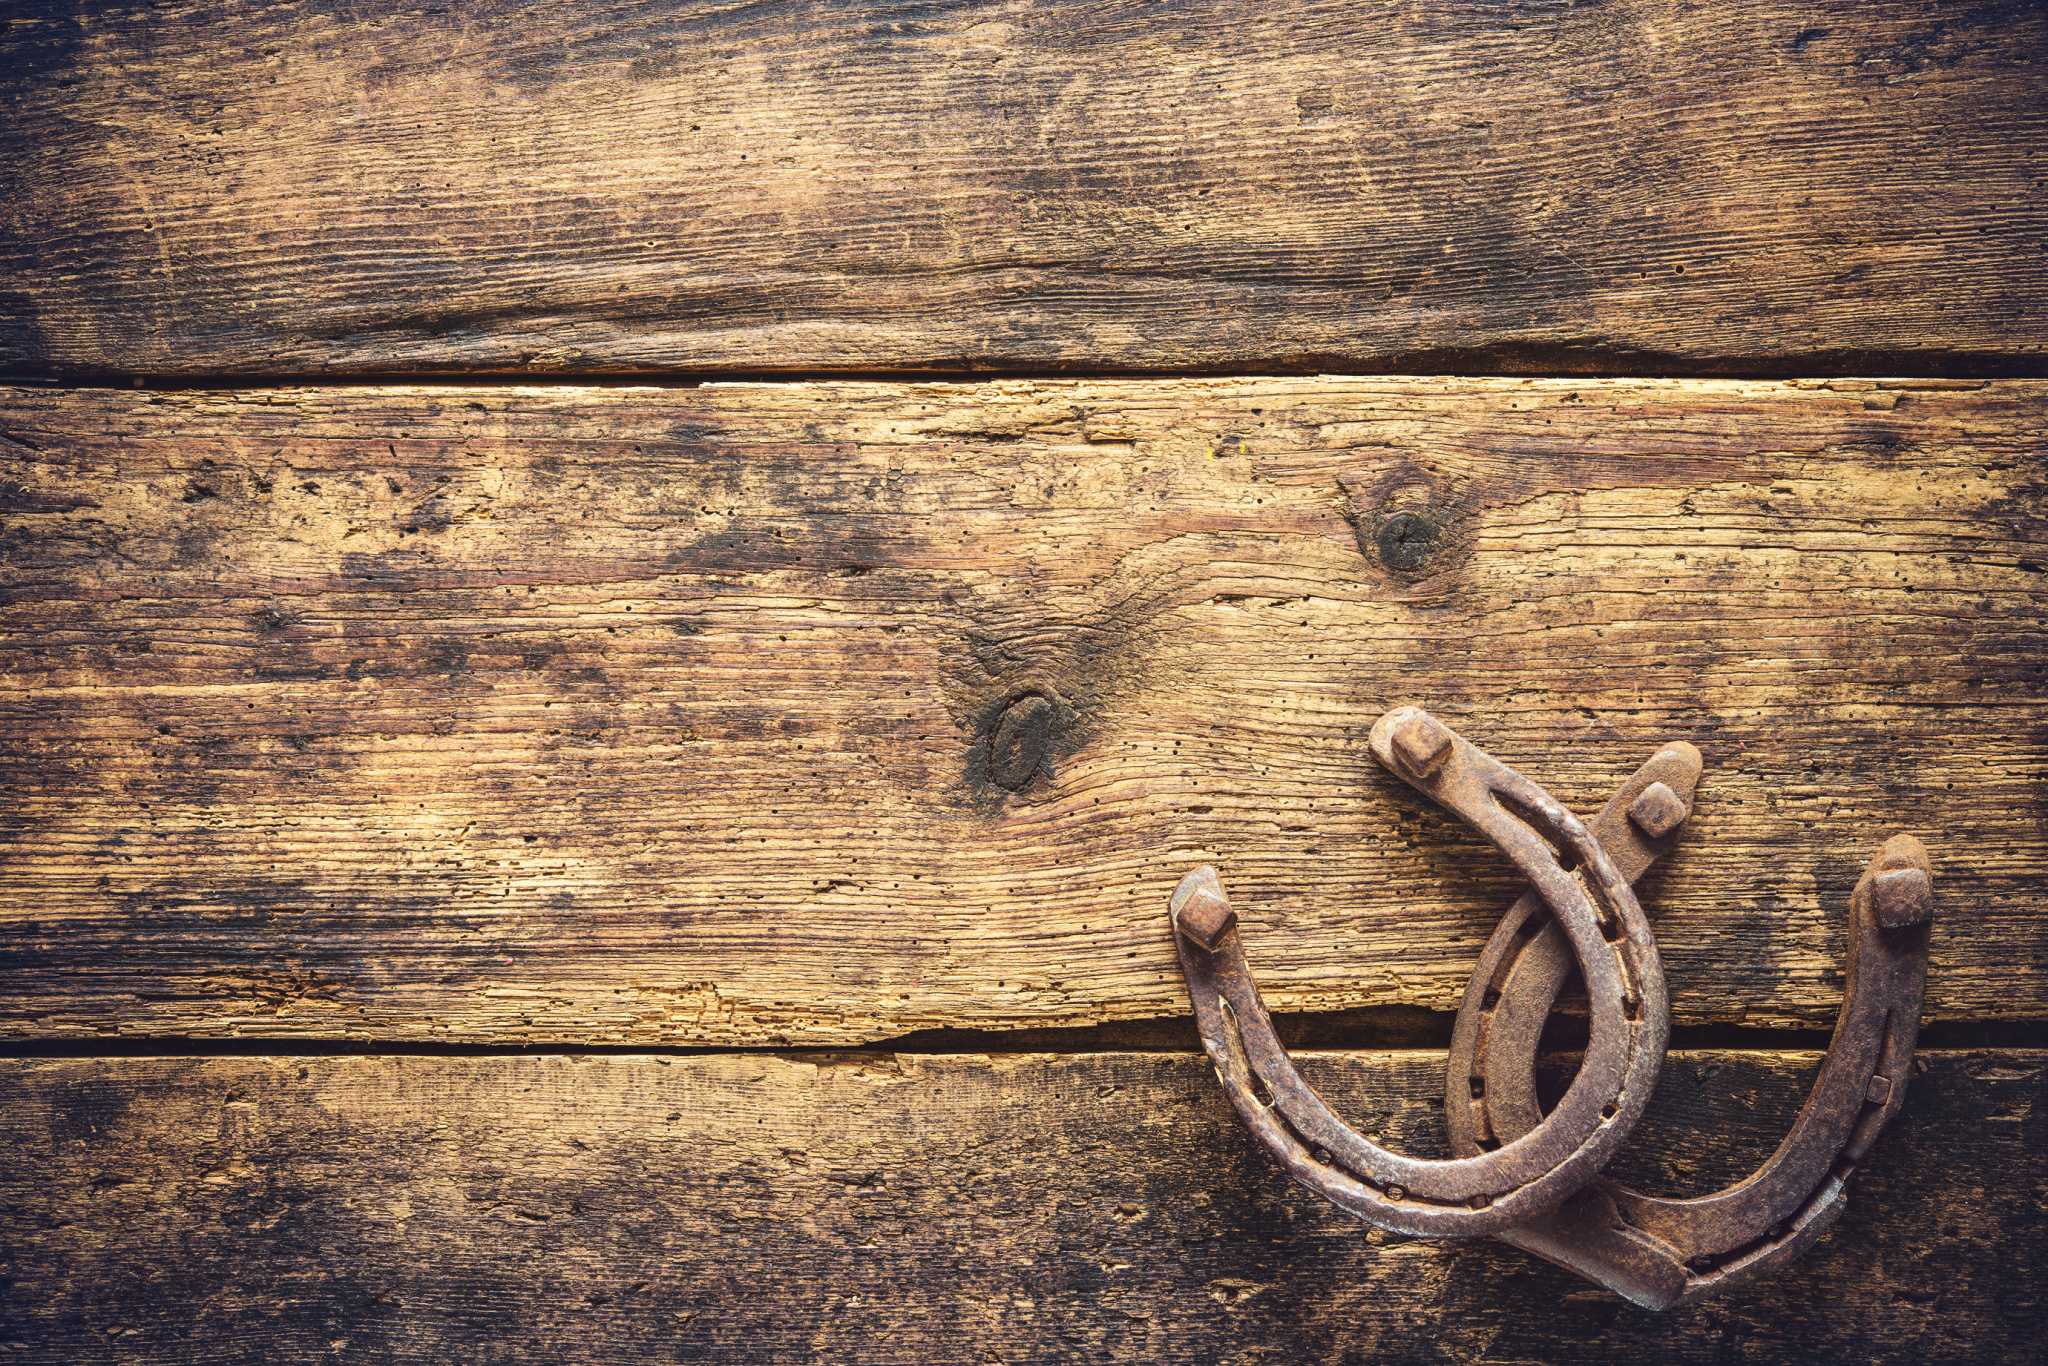 Have a horseshoe hanging around your barn? Is it up or down? - Past The Wire